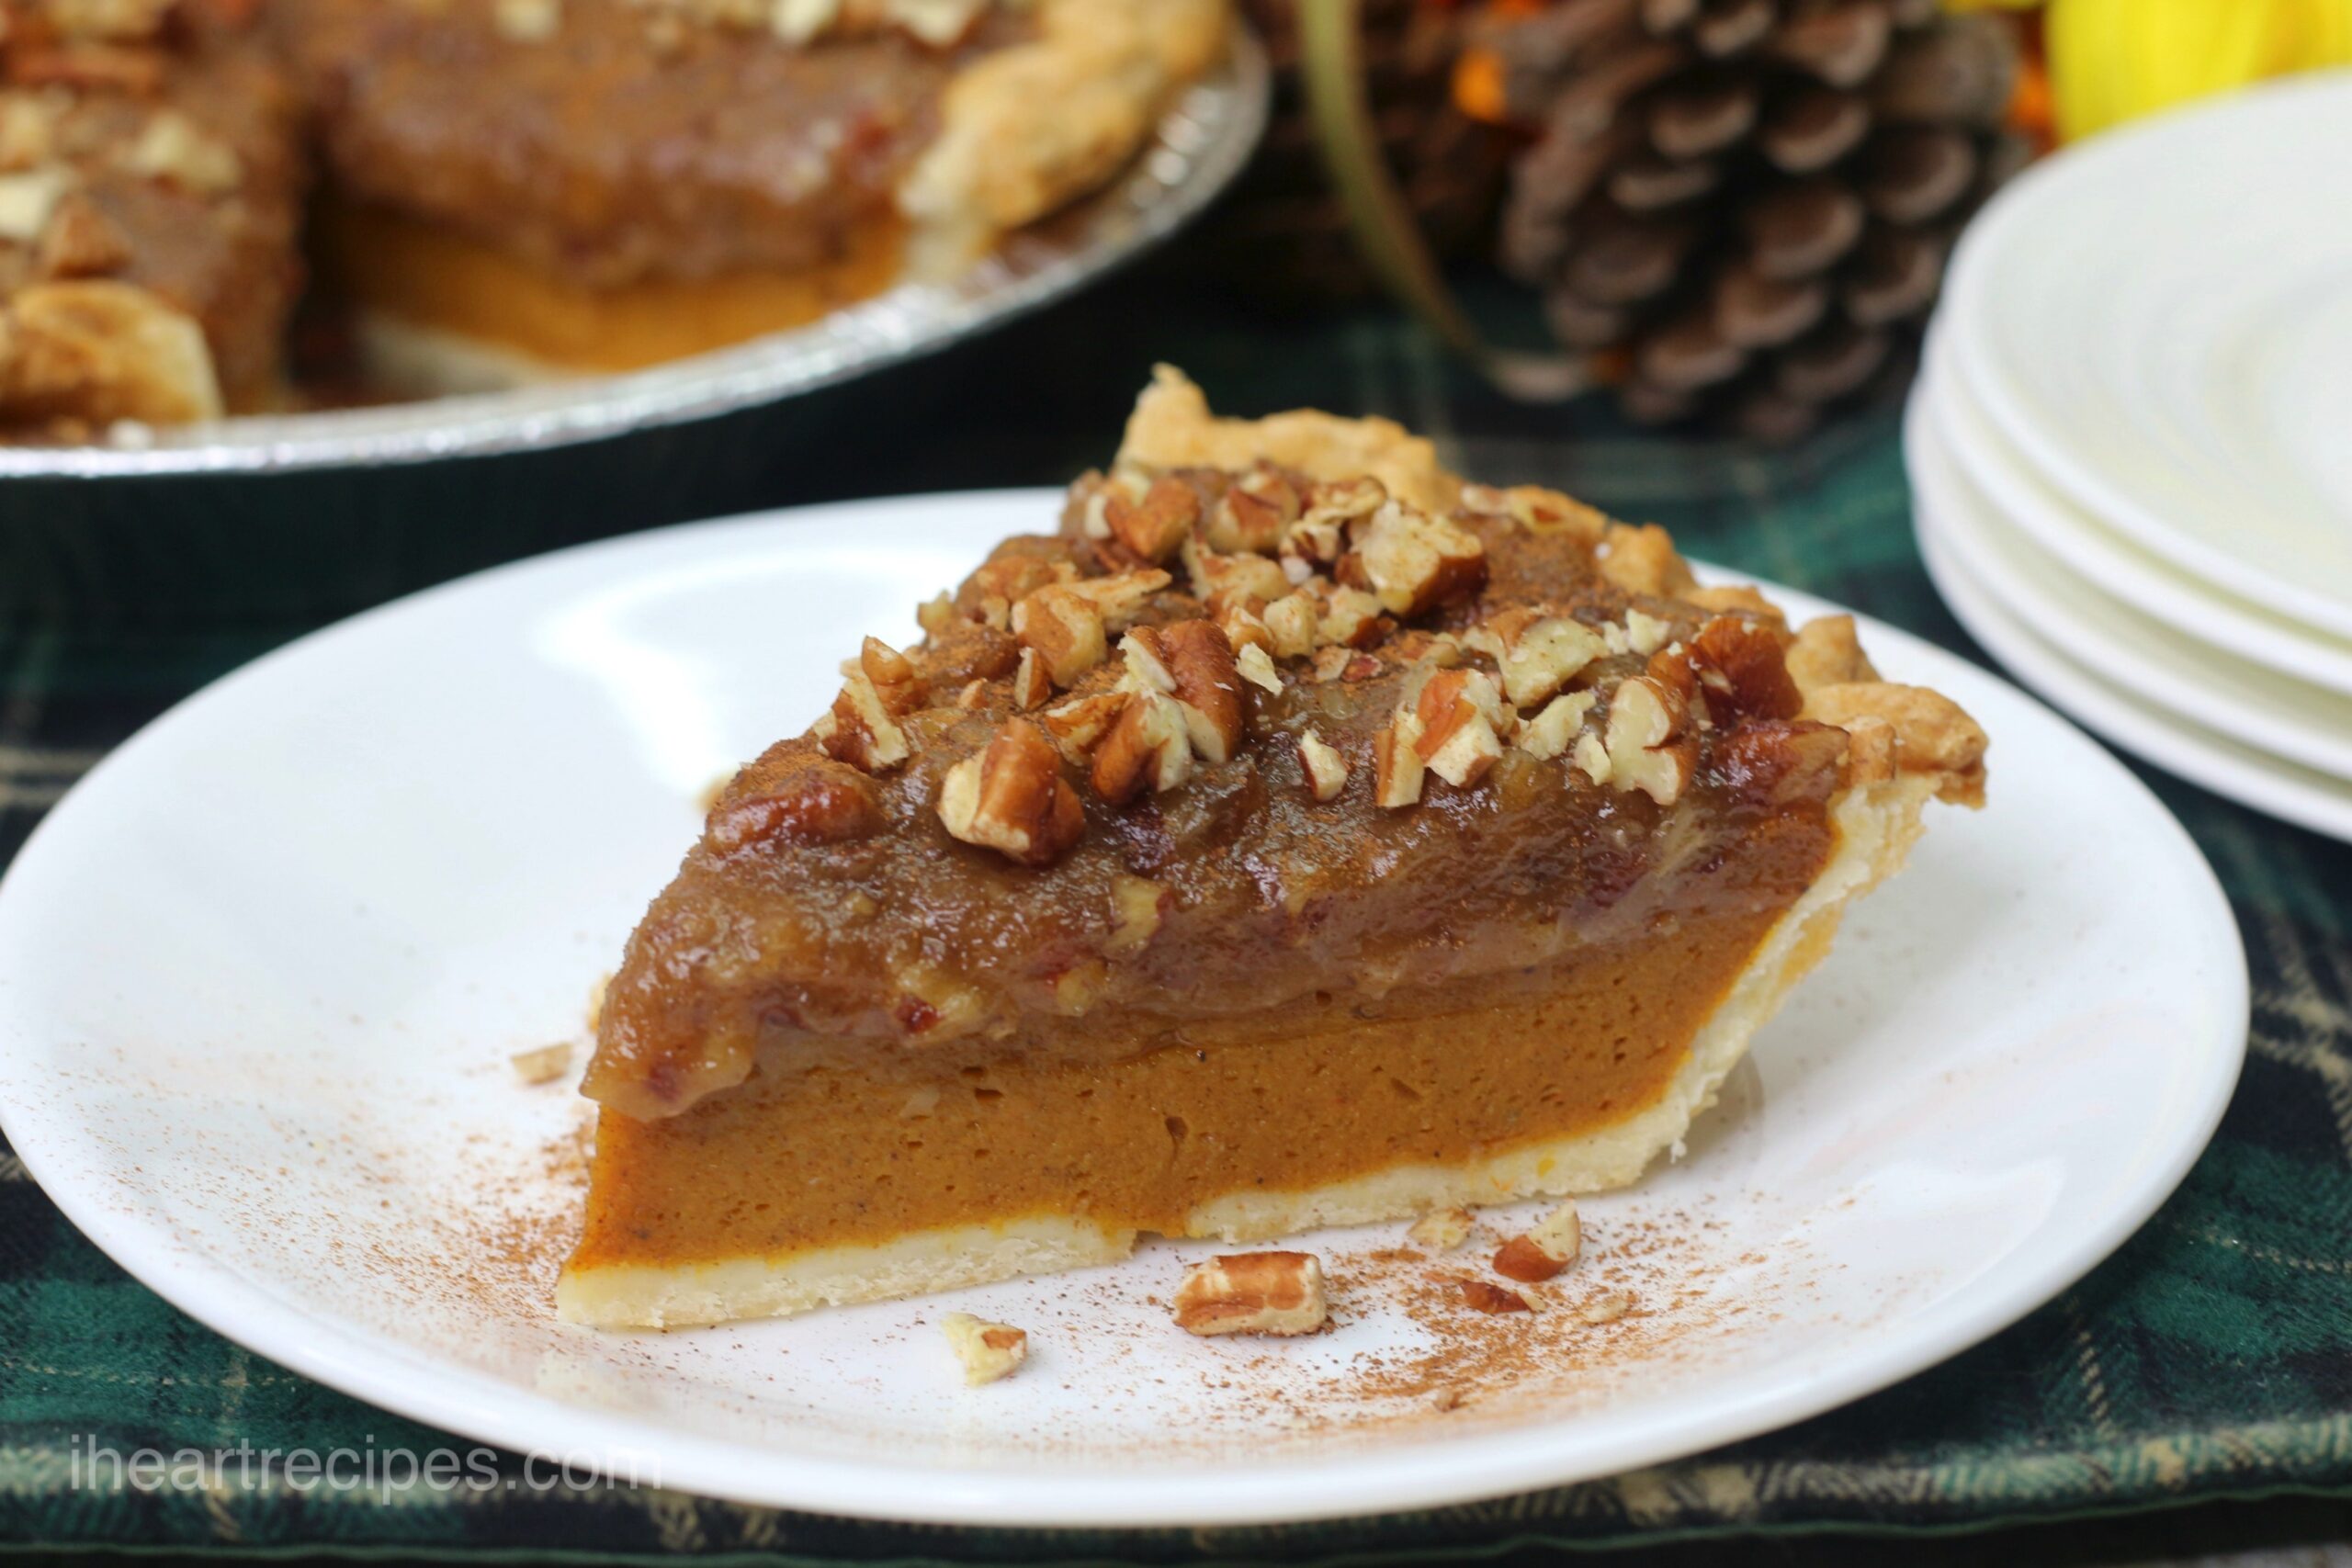 A single slice of pecan pumpkin pie served on a white plate, topped with chopped pecans and cinnamon.